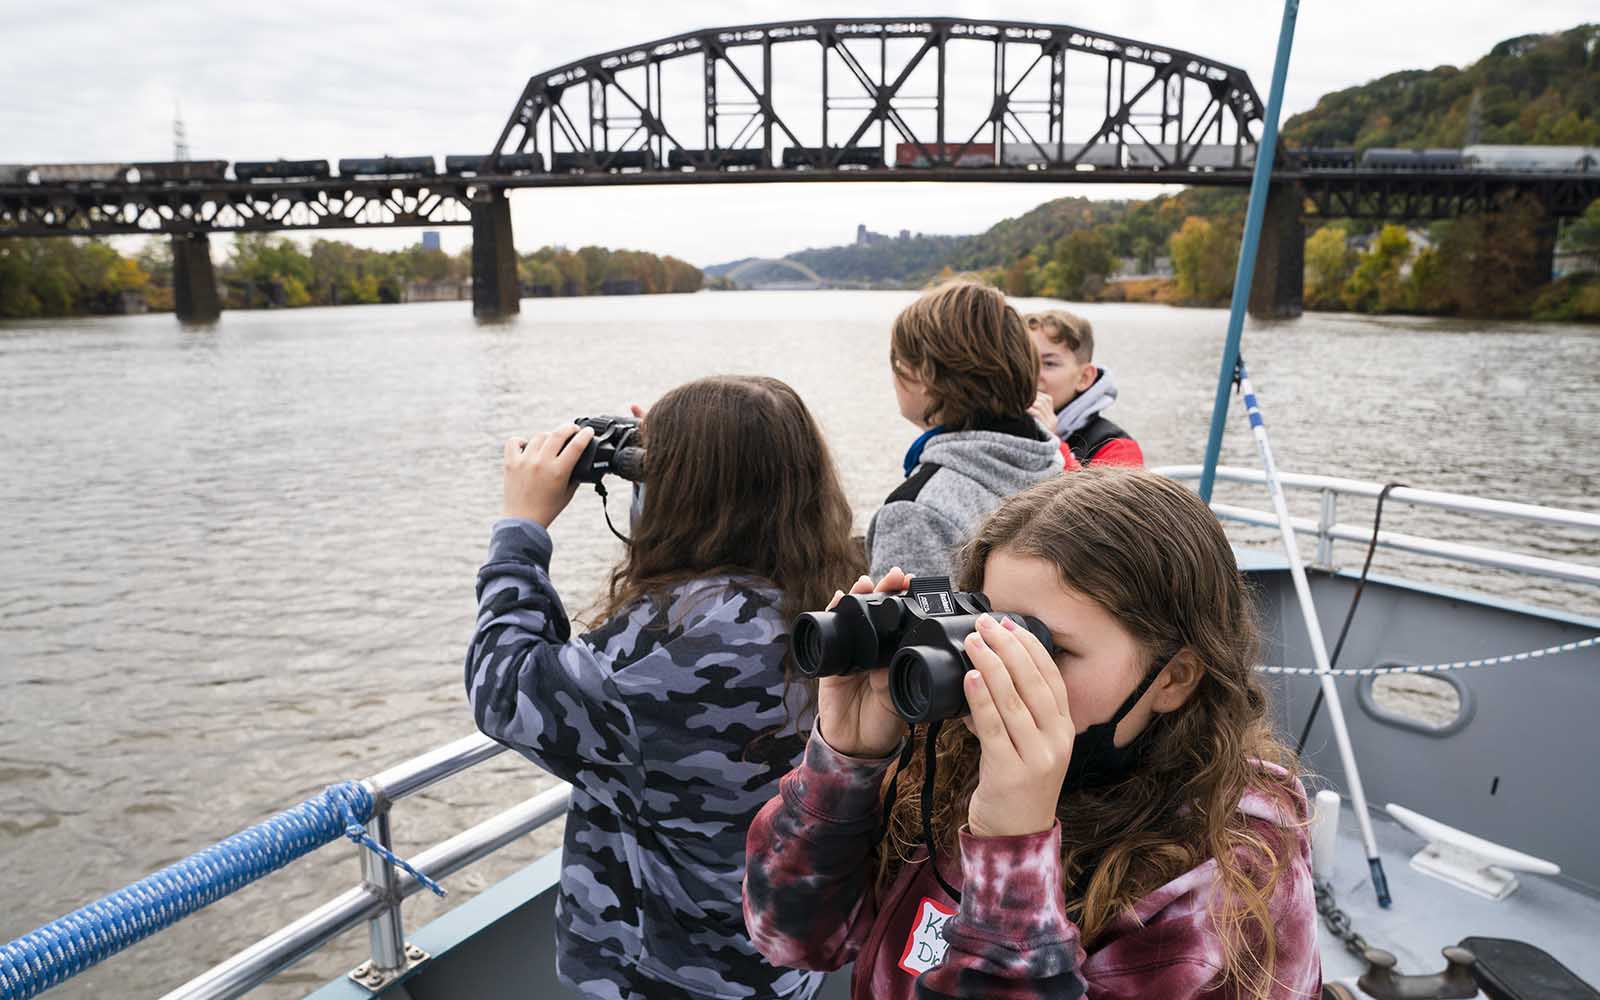 Students look through binoculars on the bow of the Explorer riverboat.